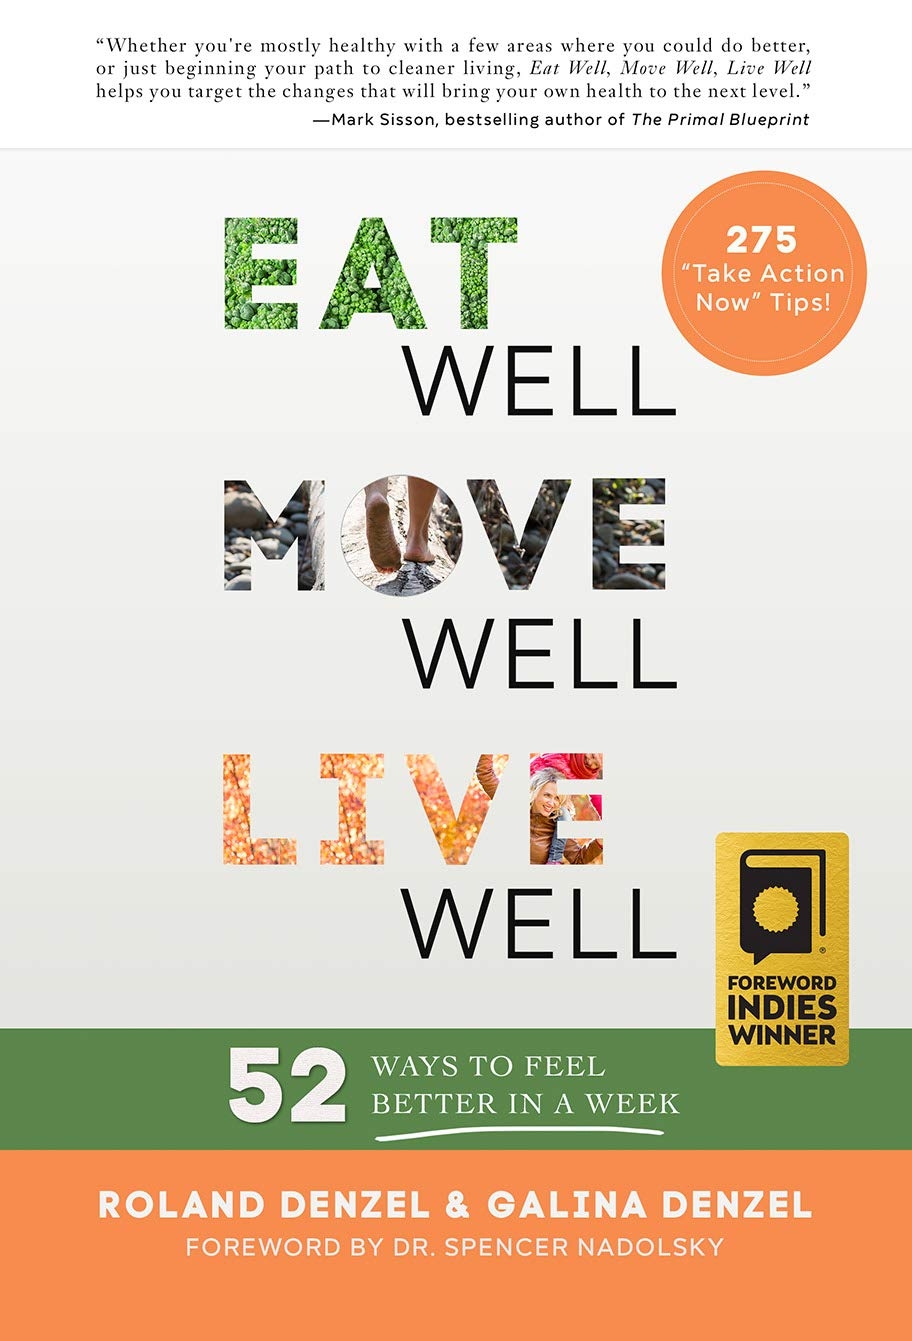 Eat Well, Move Well, Live Well: 52 Ways to Feel Better in a Week   price checker   price checker Description Gallery Reviews